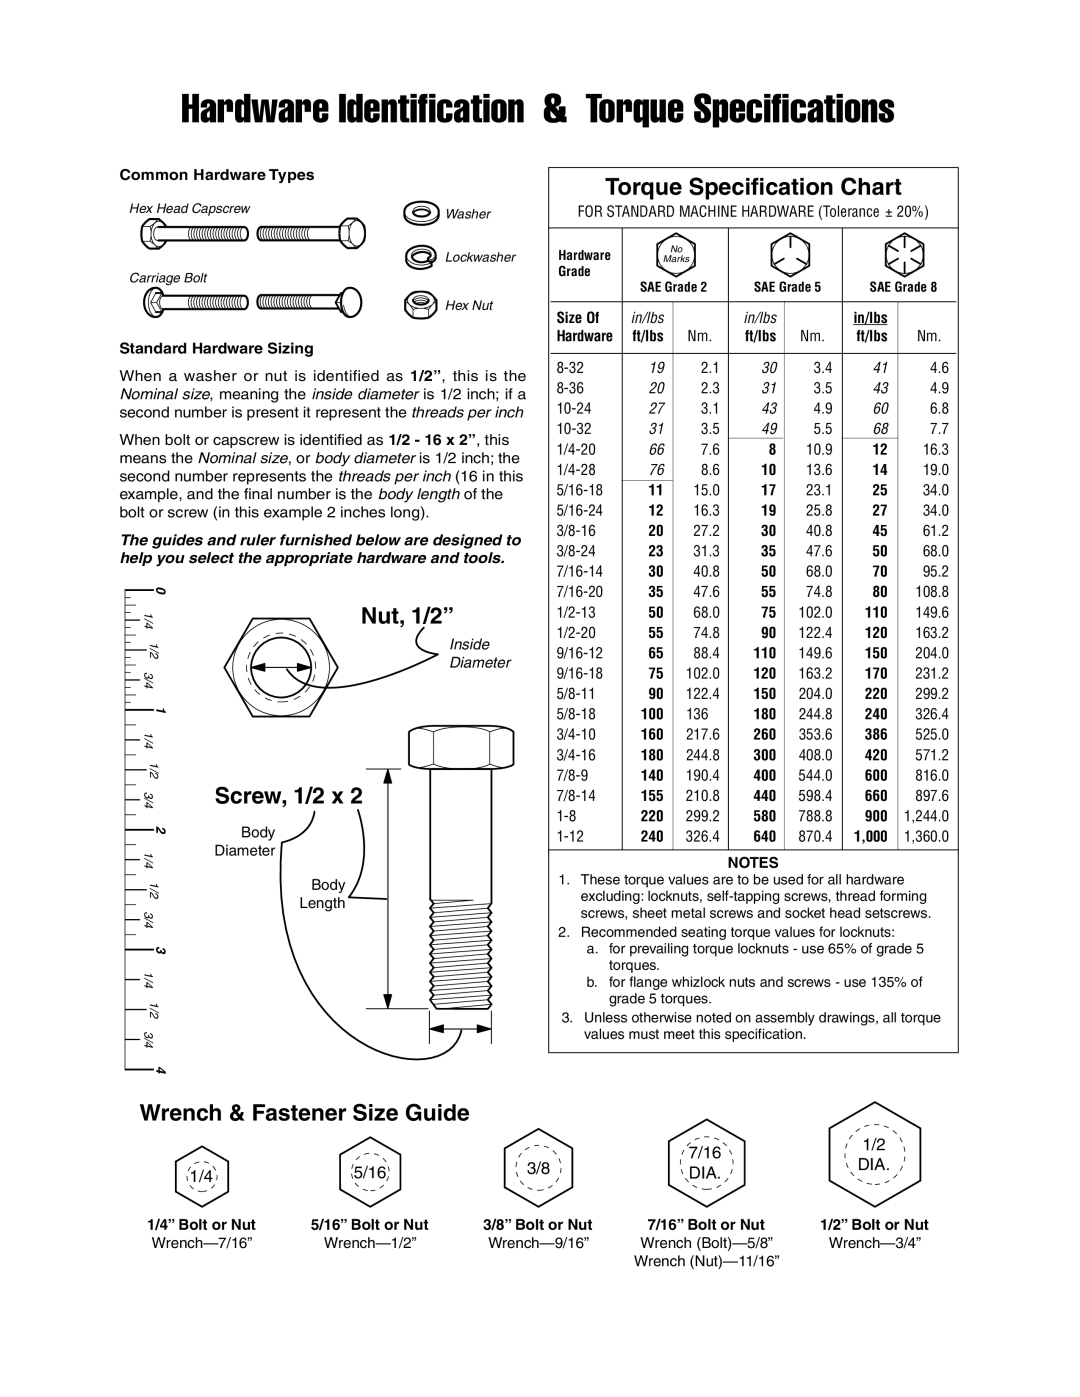 Snapper 4546 Wrench & Fastener Size Guide, Hardware Identification & Torque Specifications, Torque Specification Chart 